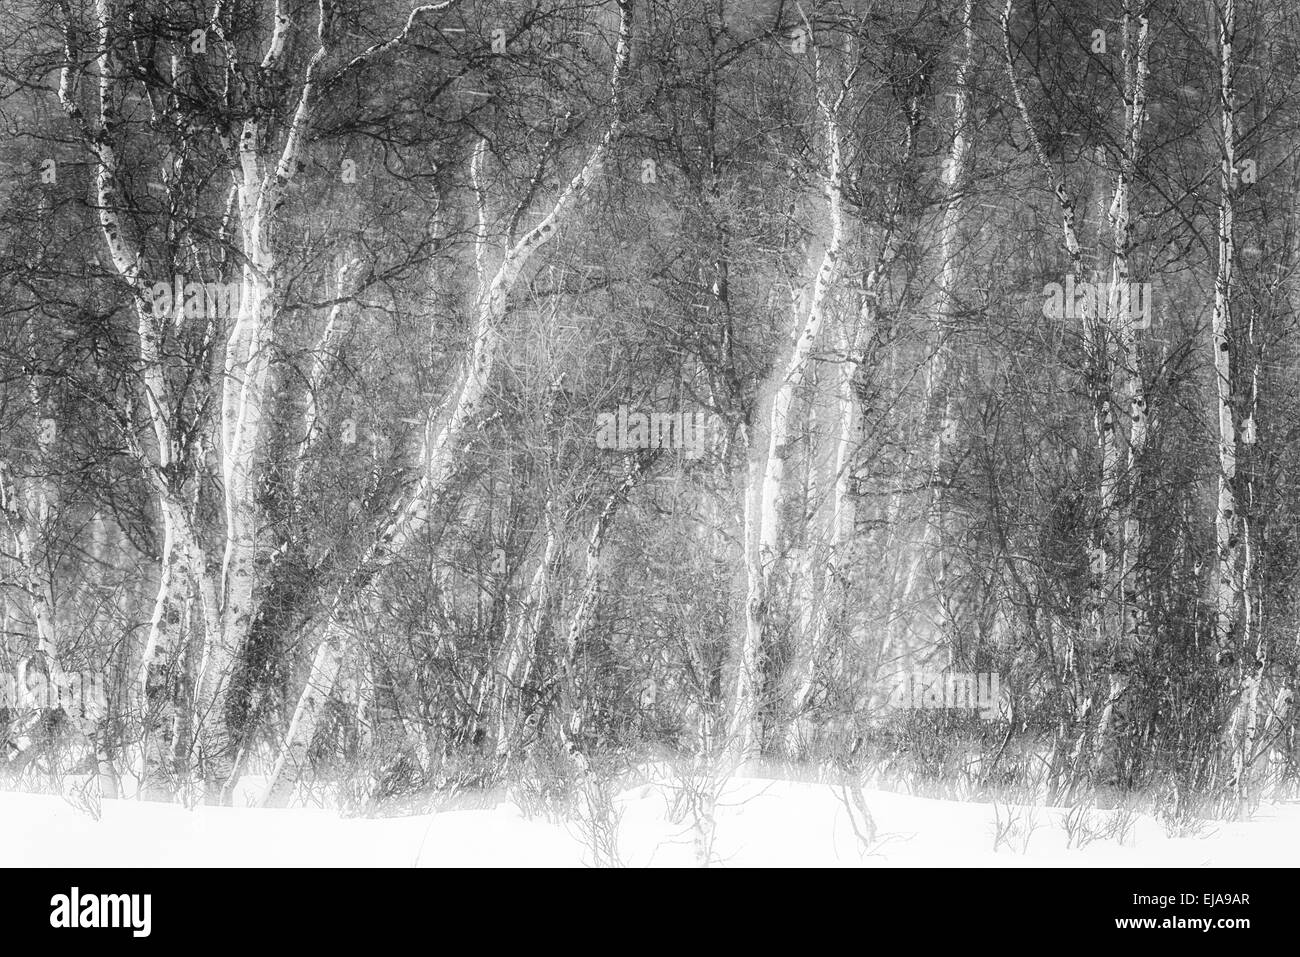 birch forest in snow, double exposure, Lapland Stock Photo